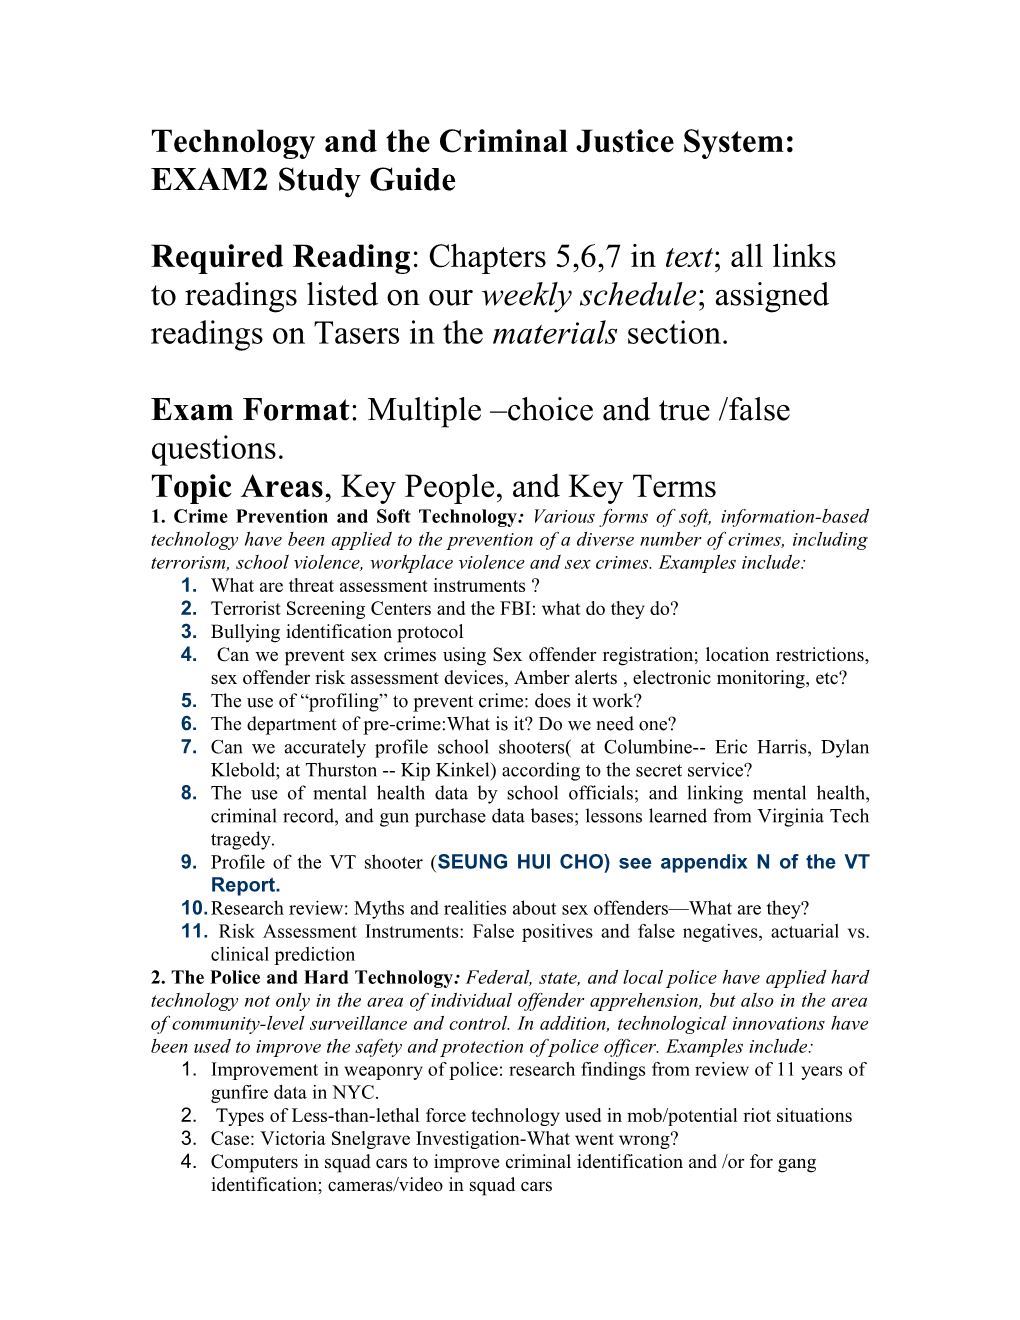 Technology and the Criminal Justice System: EXAM2 Study Guide